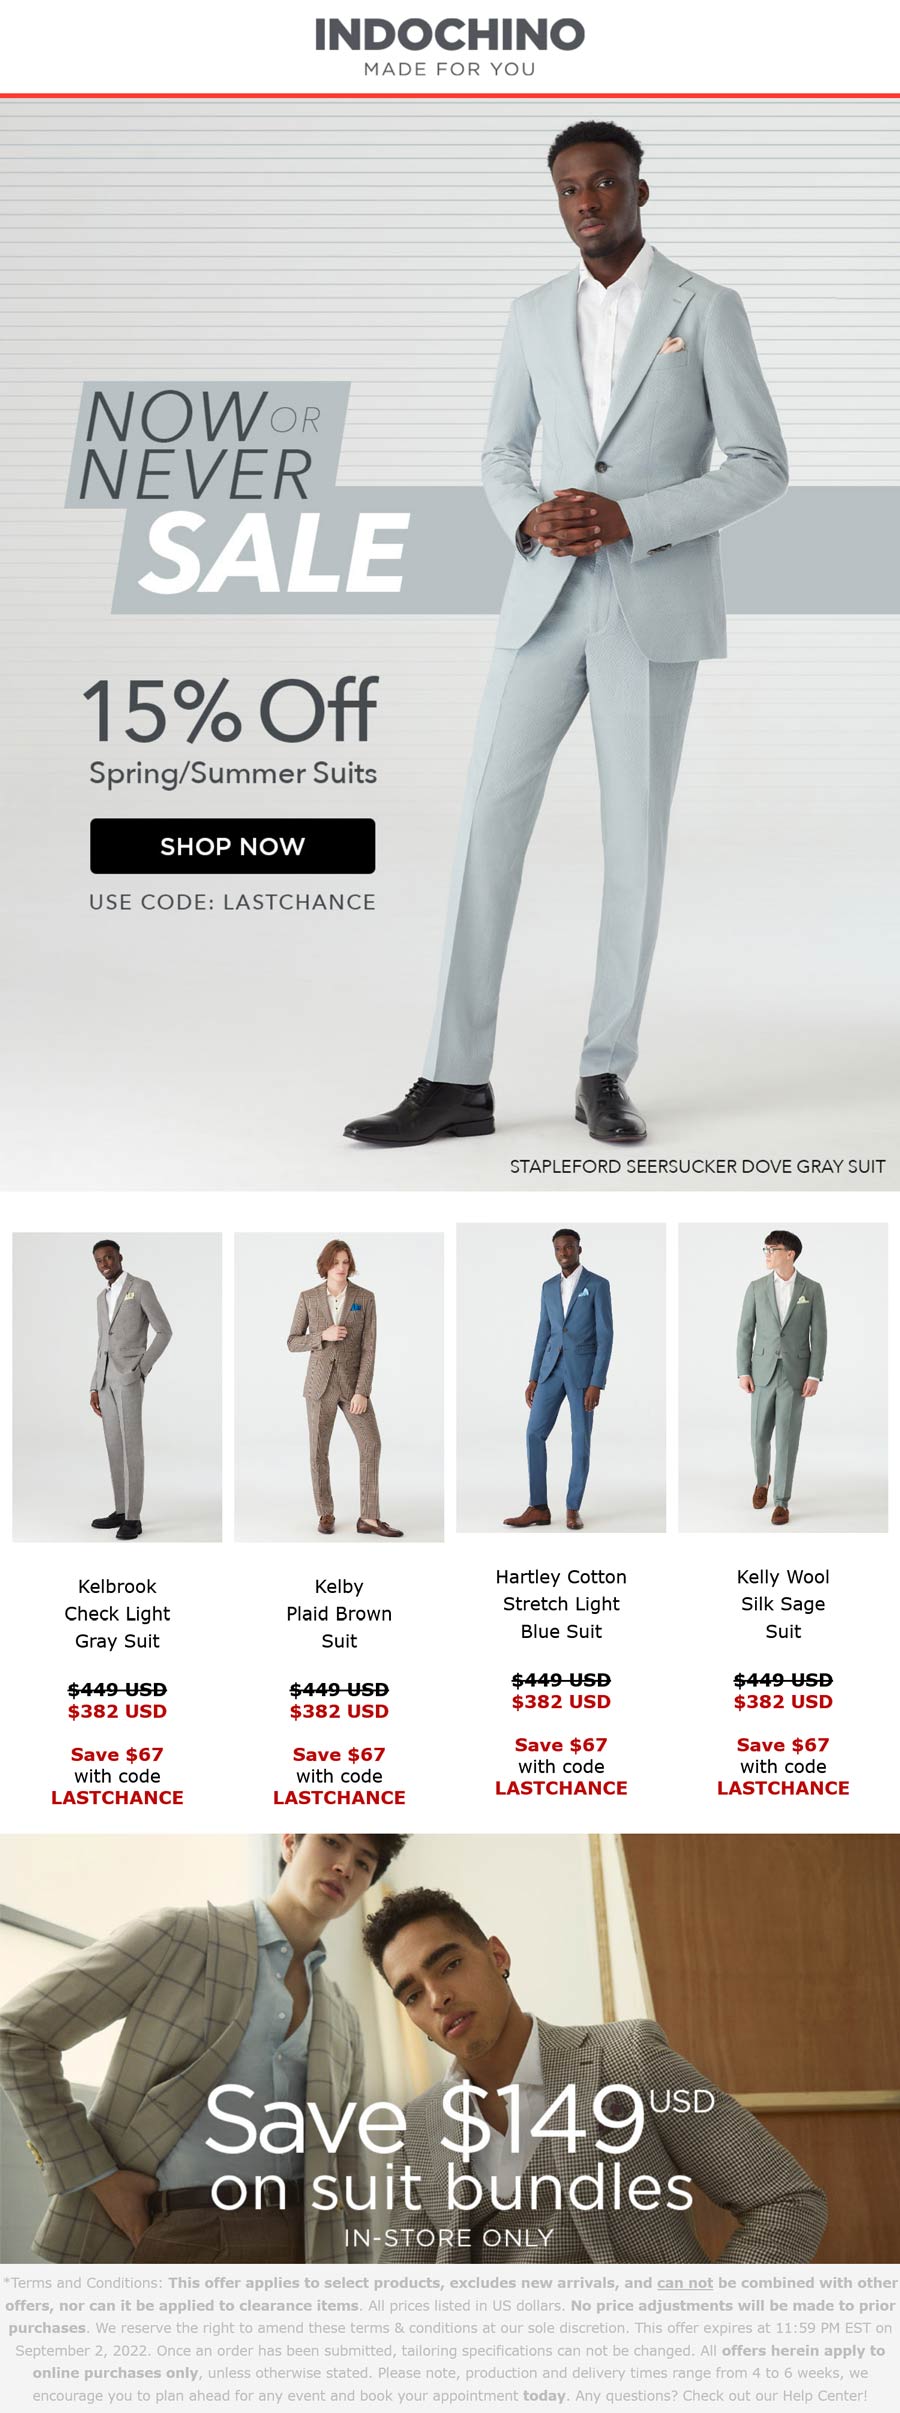 Indochino stores Coupon  15% off Summer suits at Indochino via promo code LASTCHANCE #indochino 